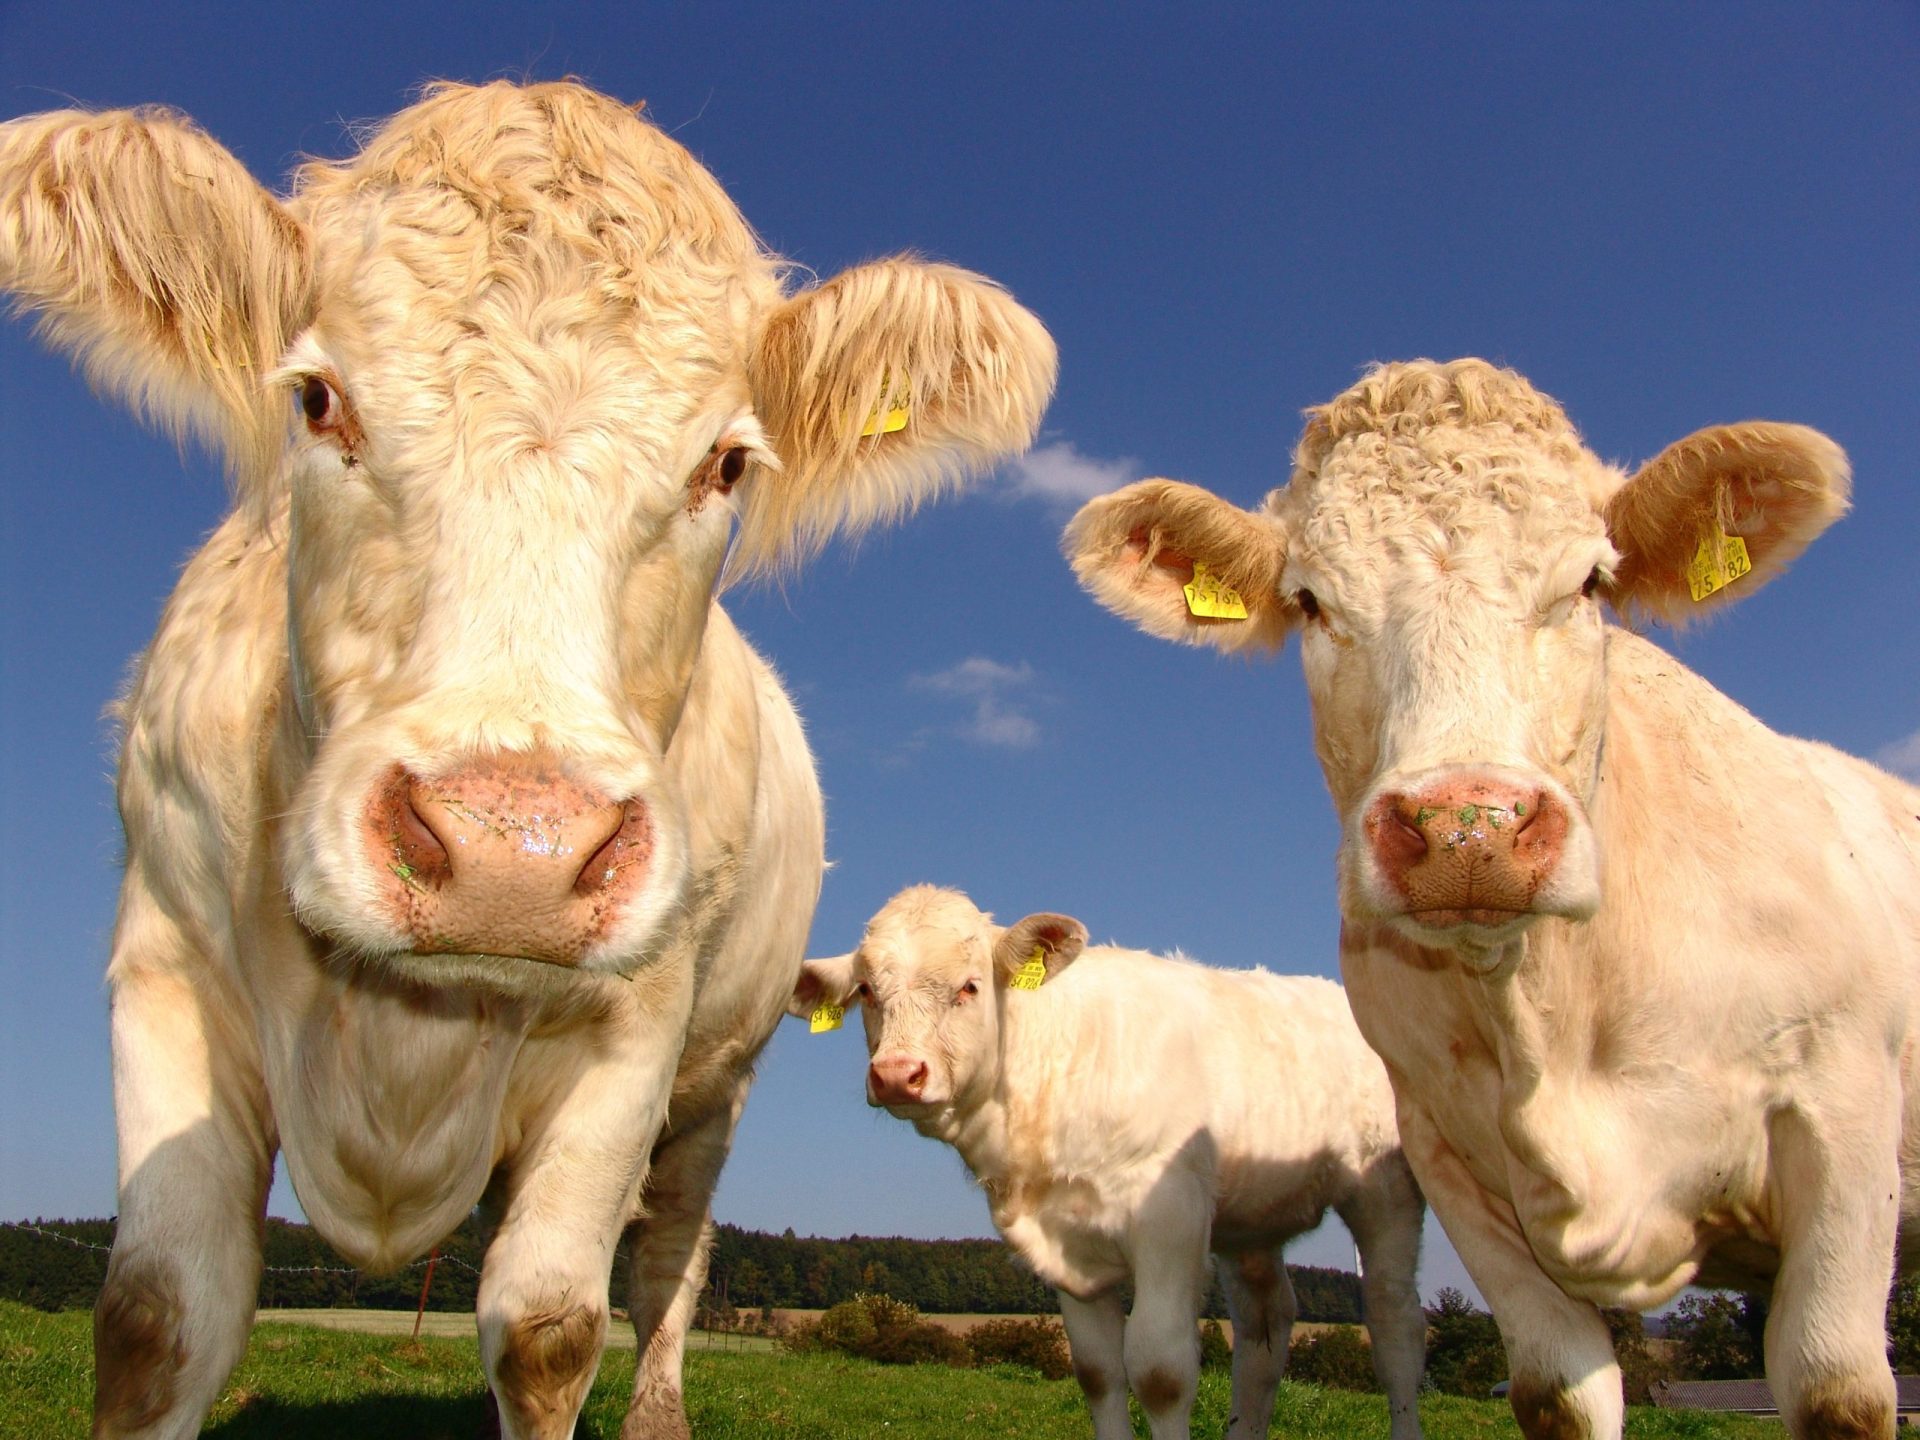 cows-curious-cattle-agriculture